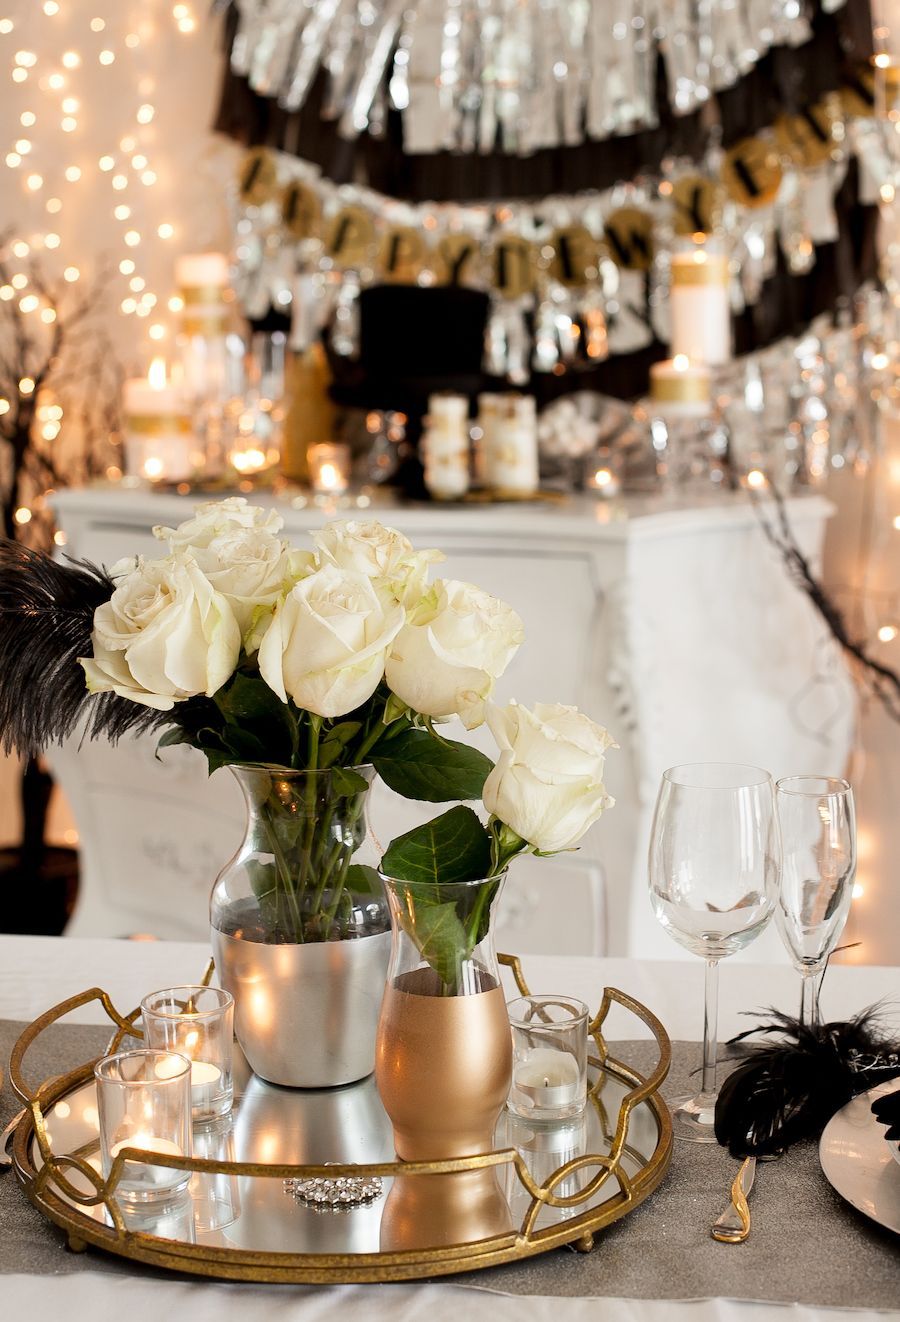 New Year's Eve decor with Gold Serving Trays via frogprincepaperie